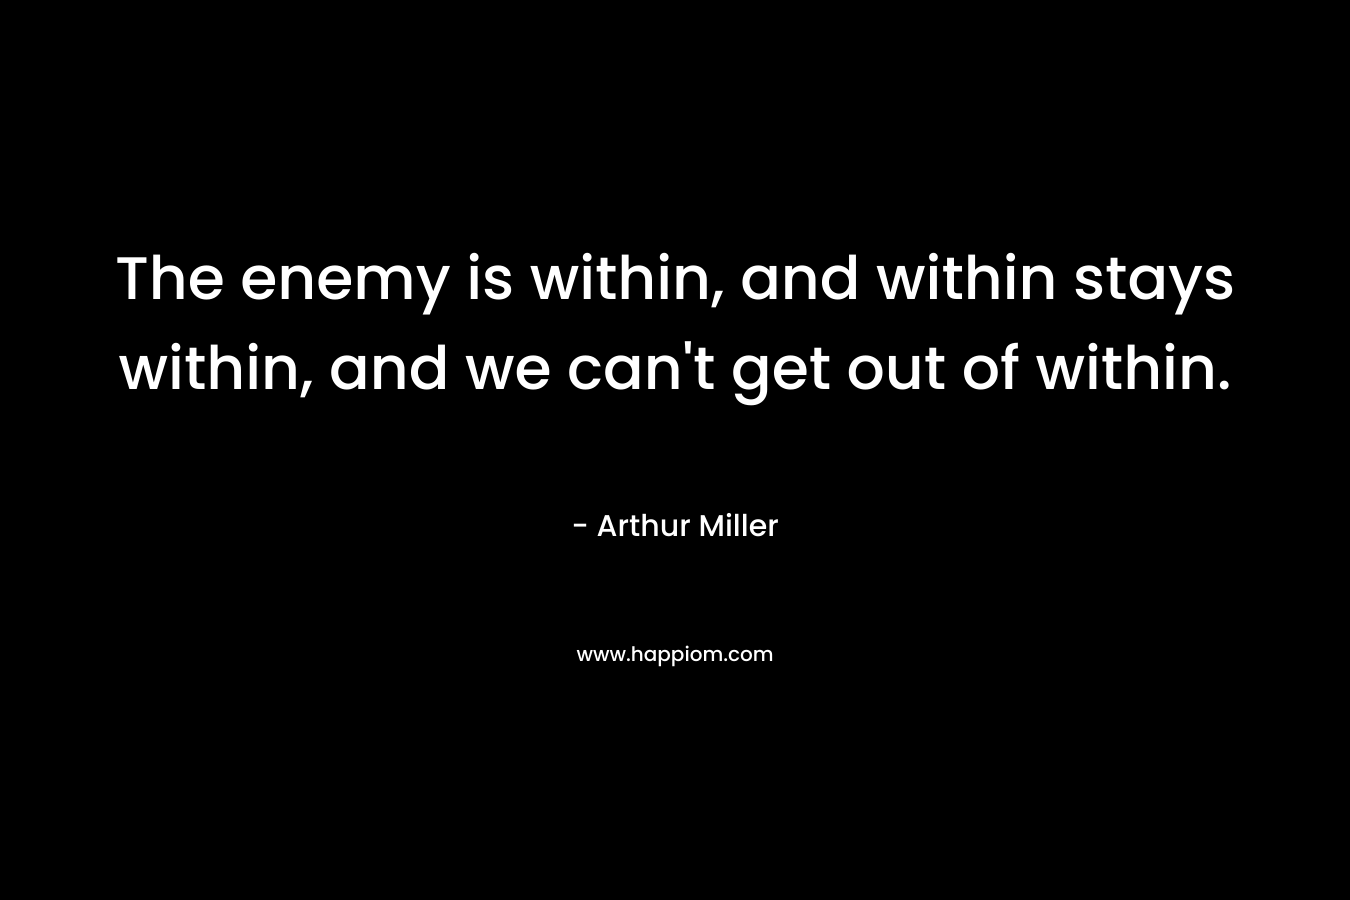 The enemy is within, and within stays within, and we can't get out of within.